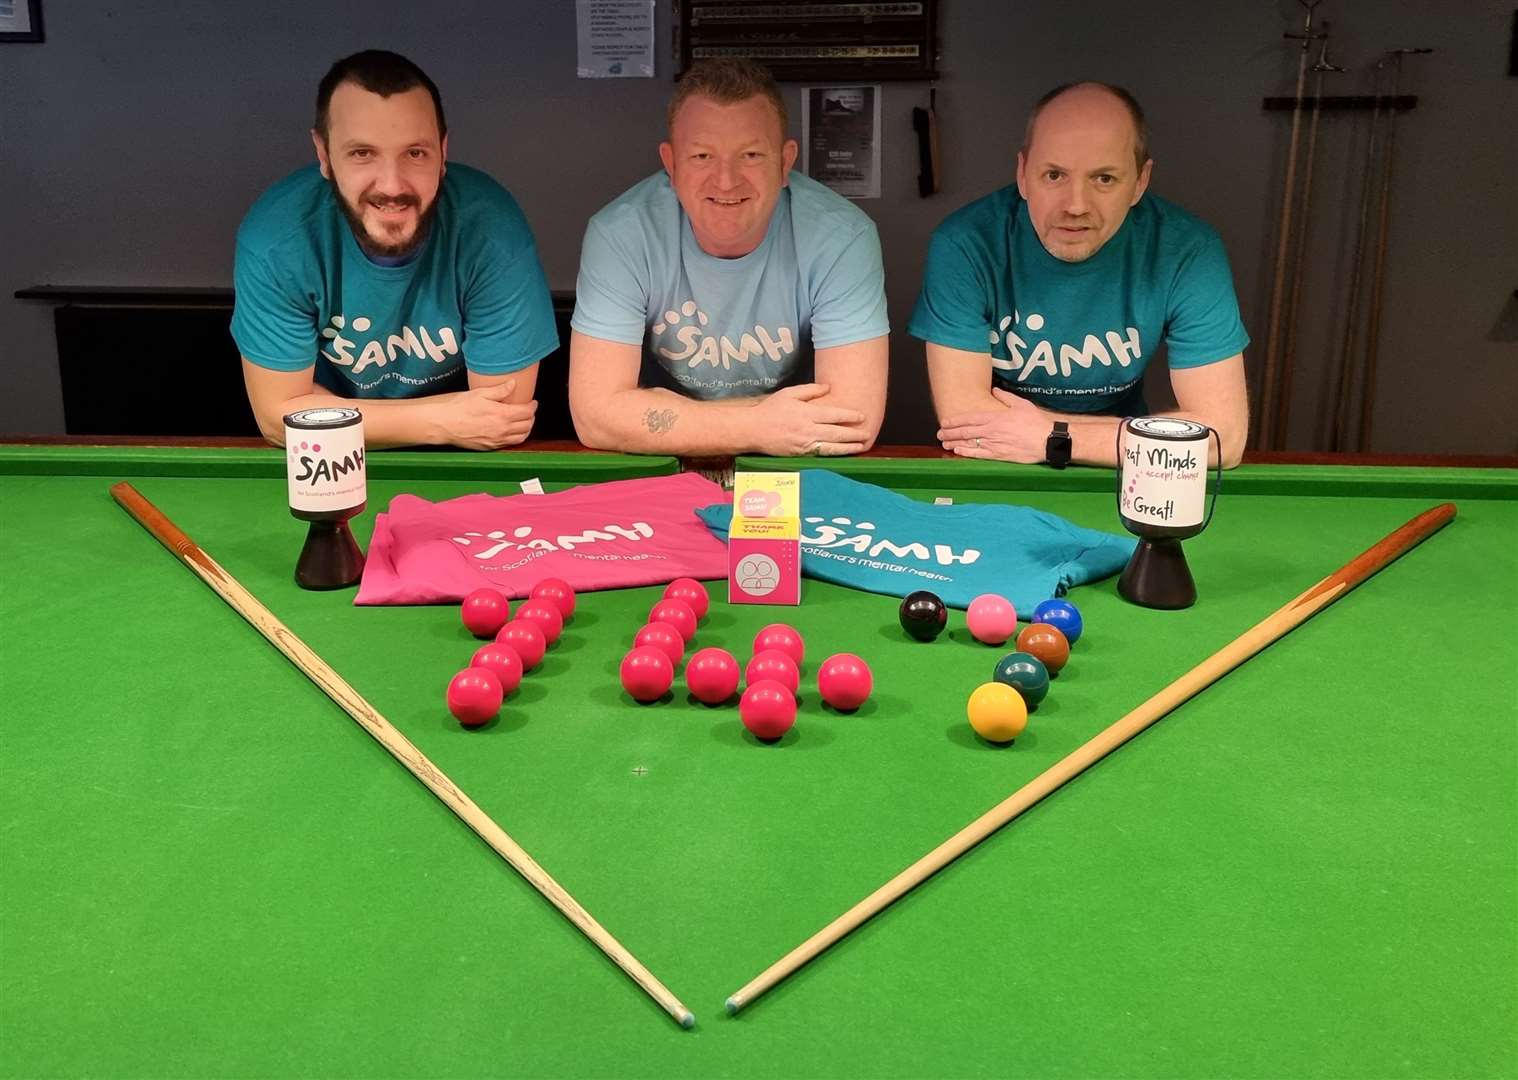 John McAleaney (Co-Chairman) Alex Cooper (Co-Chairman) and Paul Mackenzie (Owner of 147 Pool and Snooker Centre) Paul Mackenzie